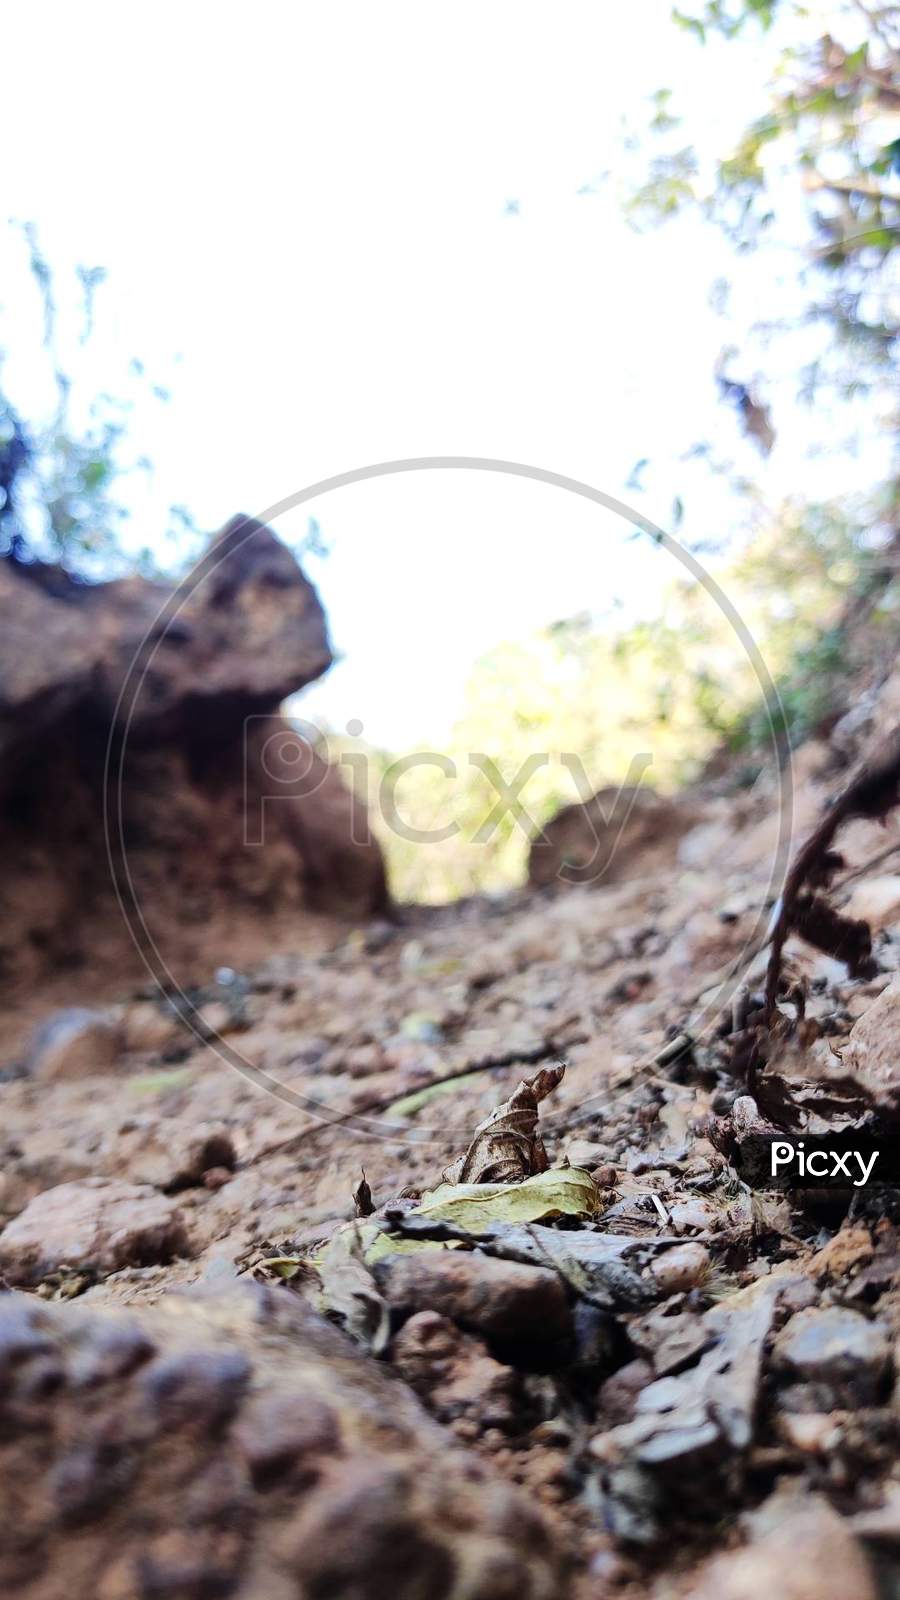 The forest way of full of rocks. Background is blurred.